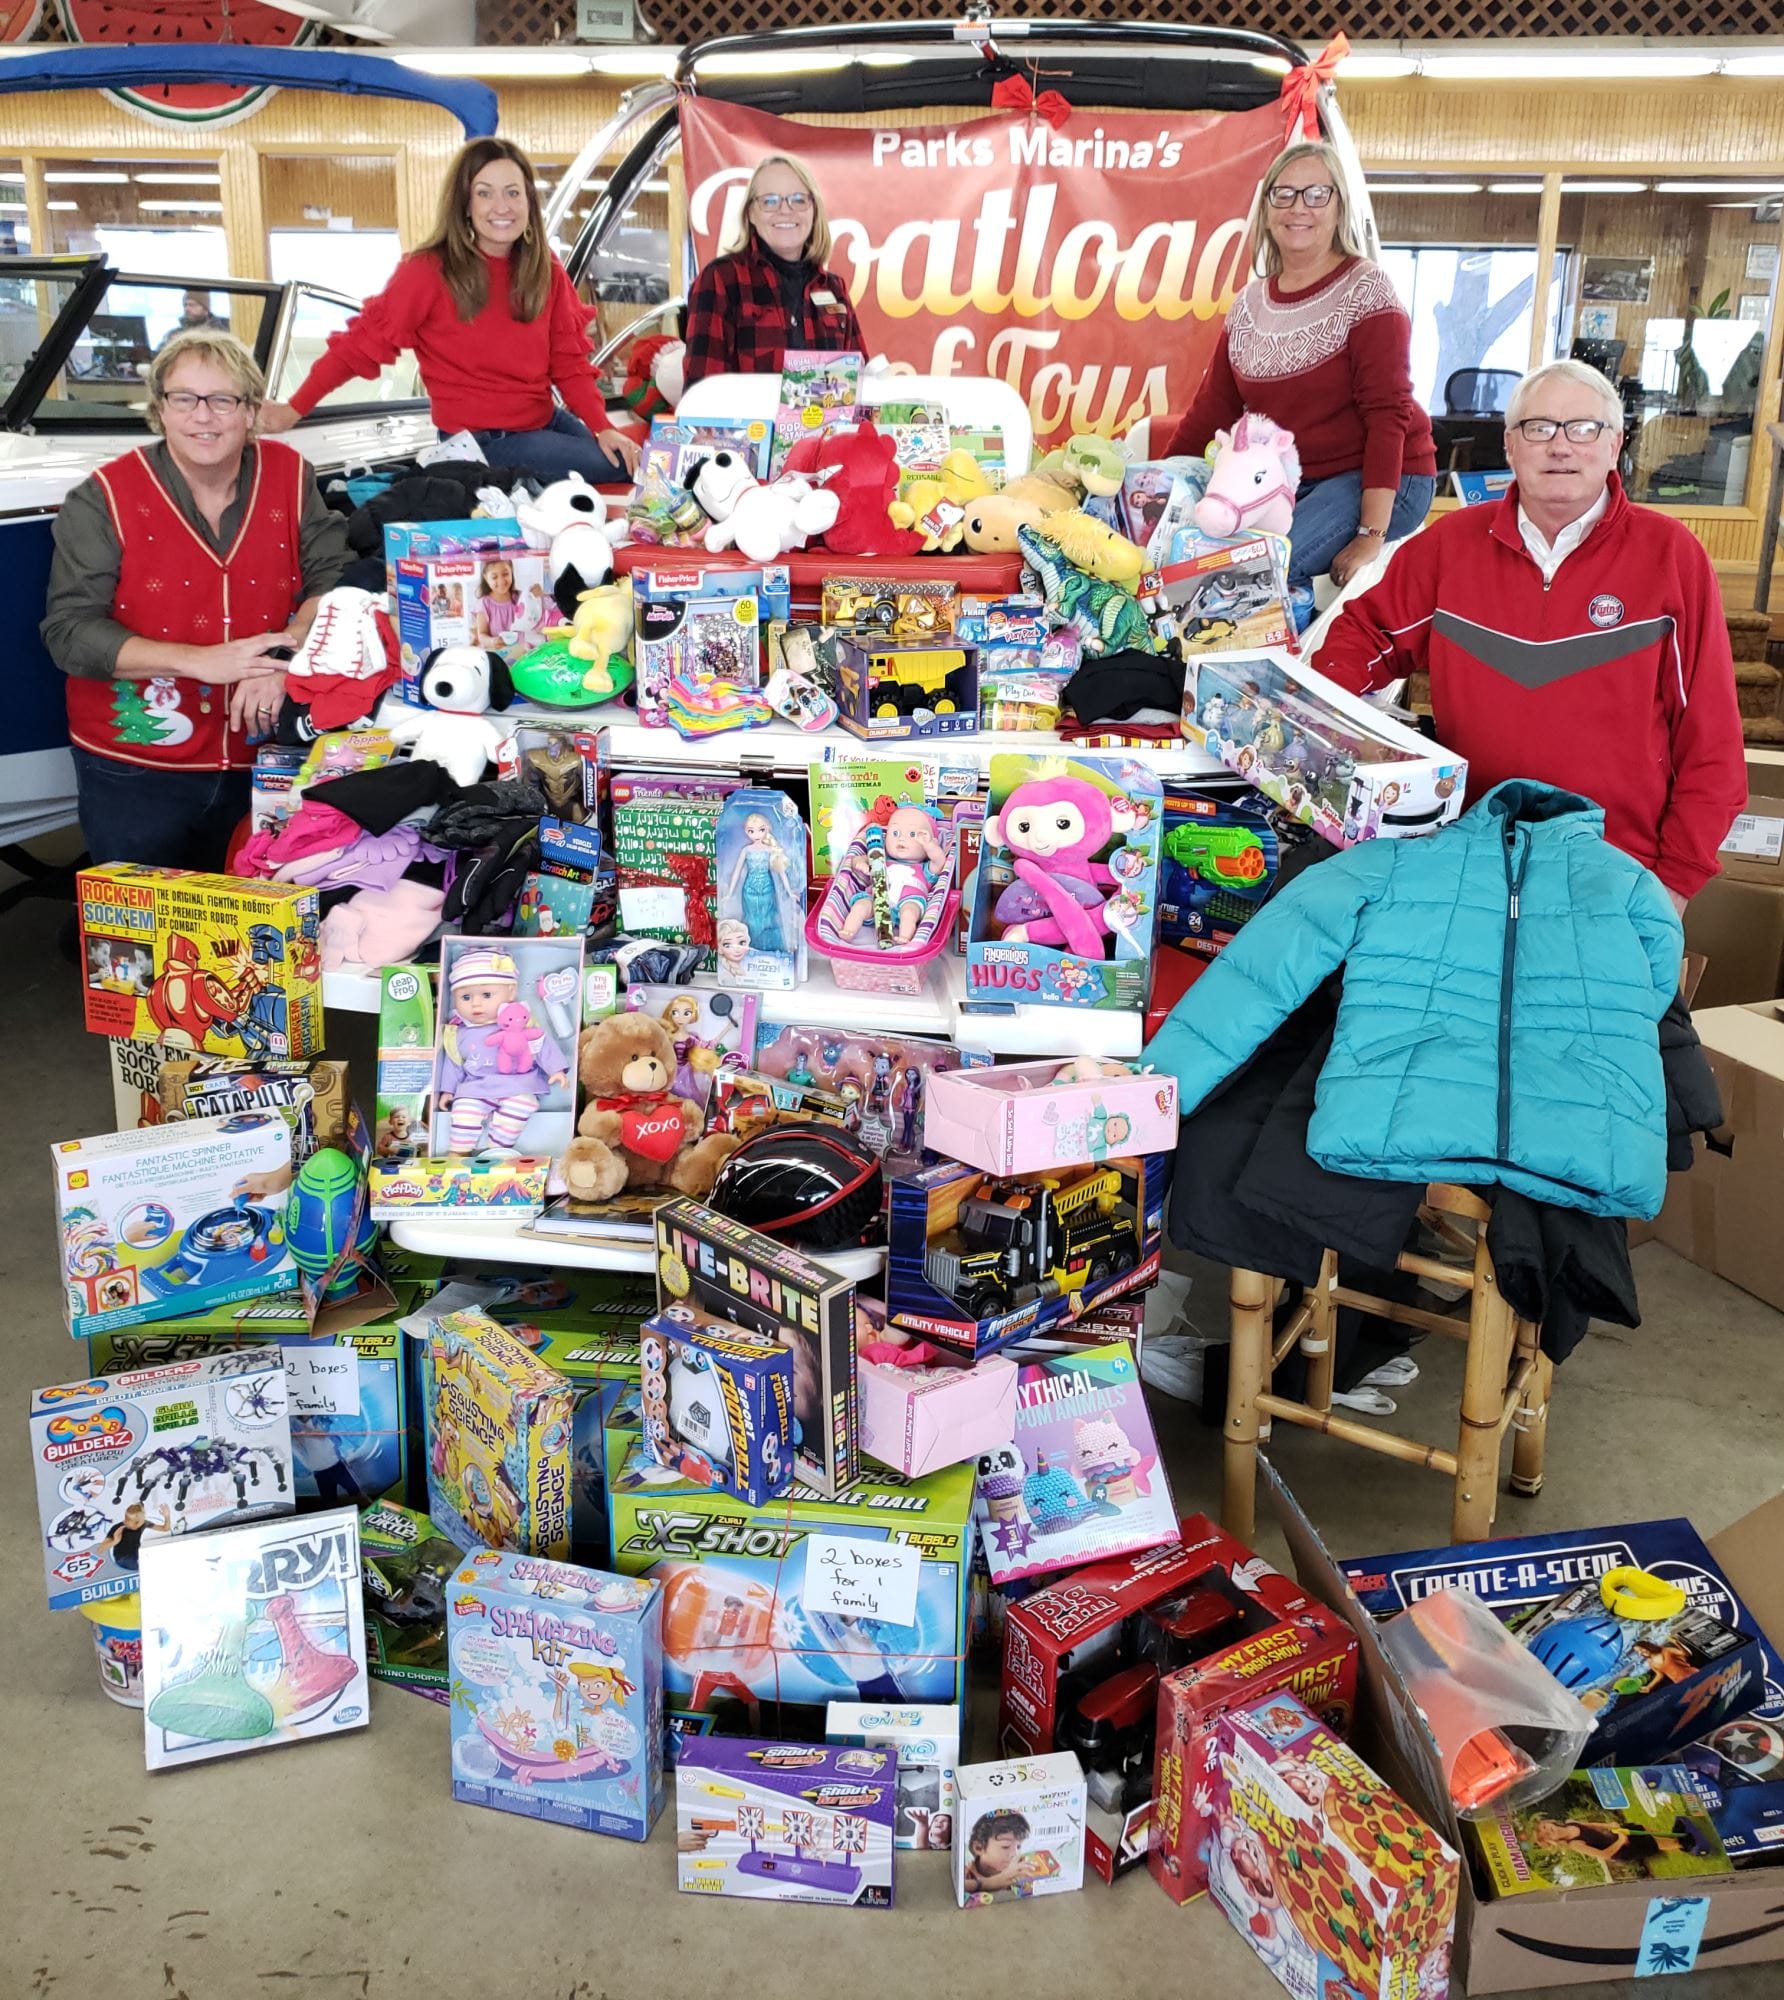 PARKS MARINA customers bring Christmas Joy to 11th Annual “Boat Loads of Toys”